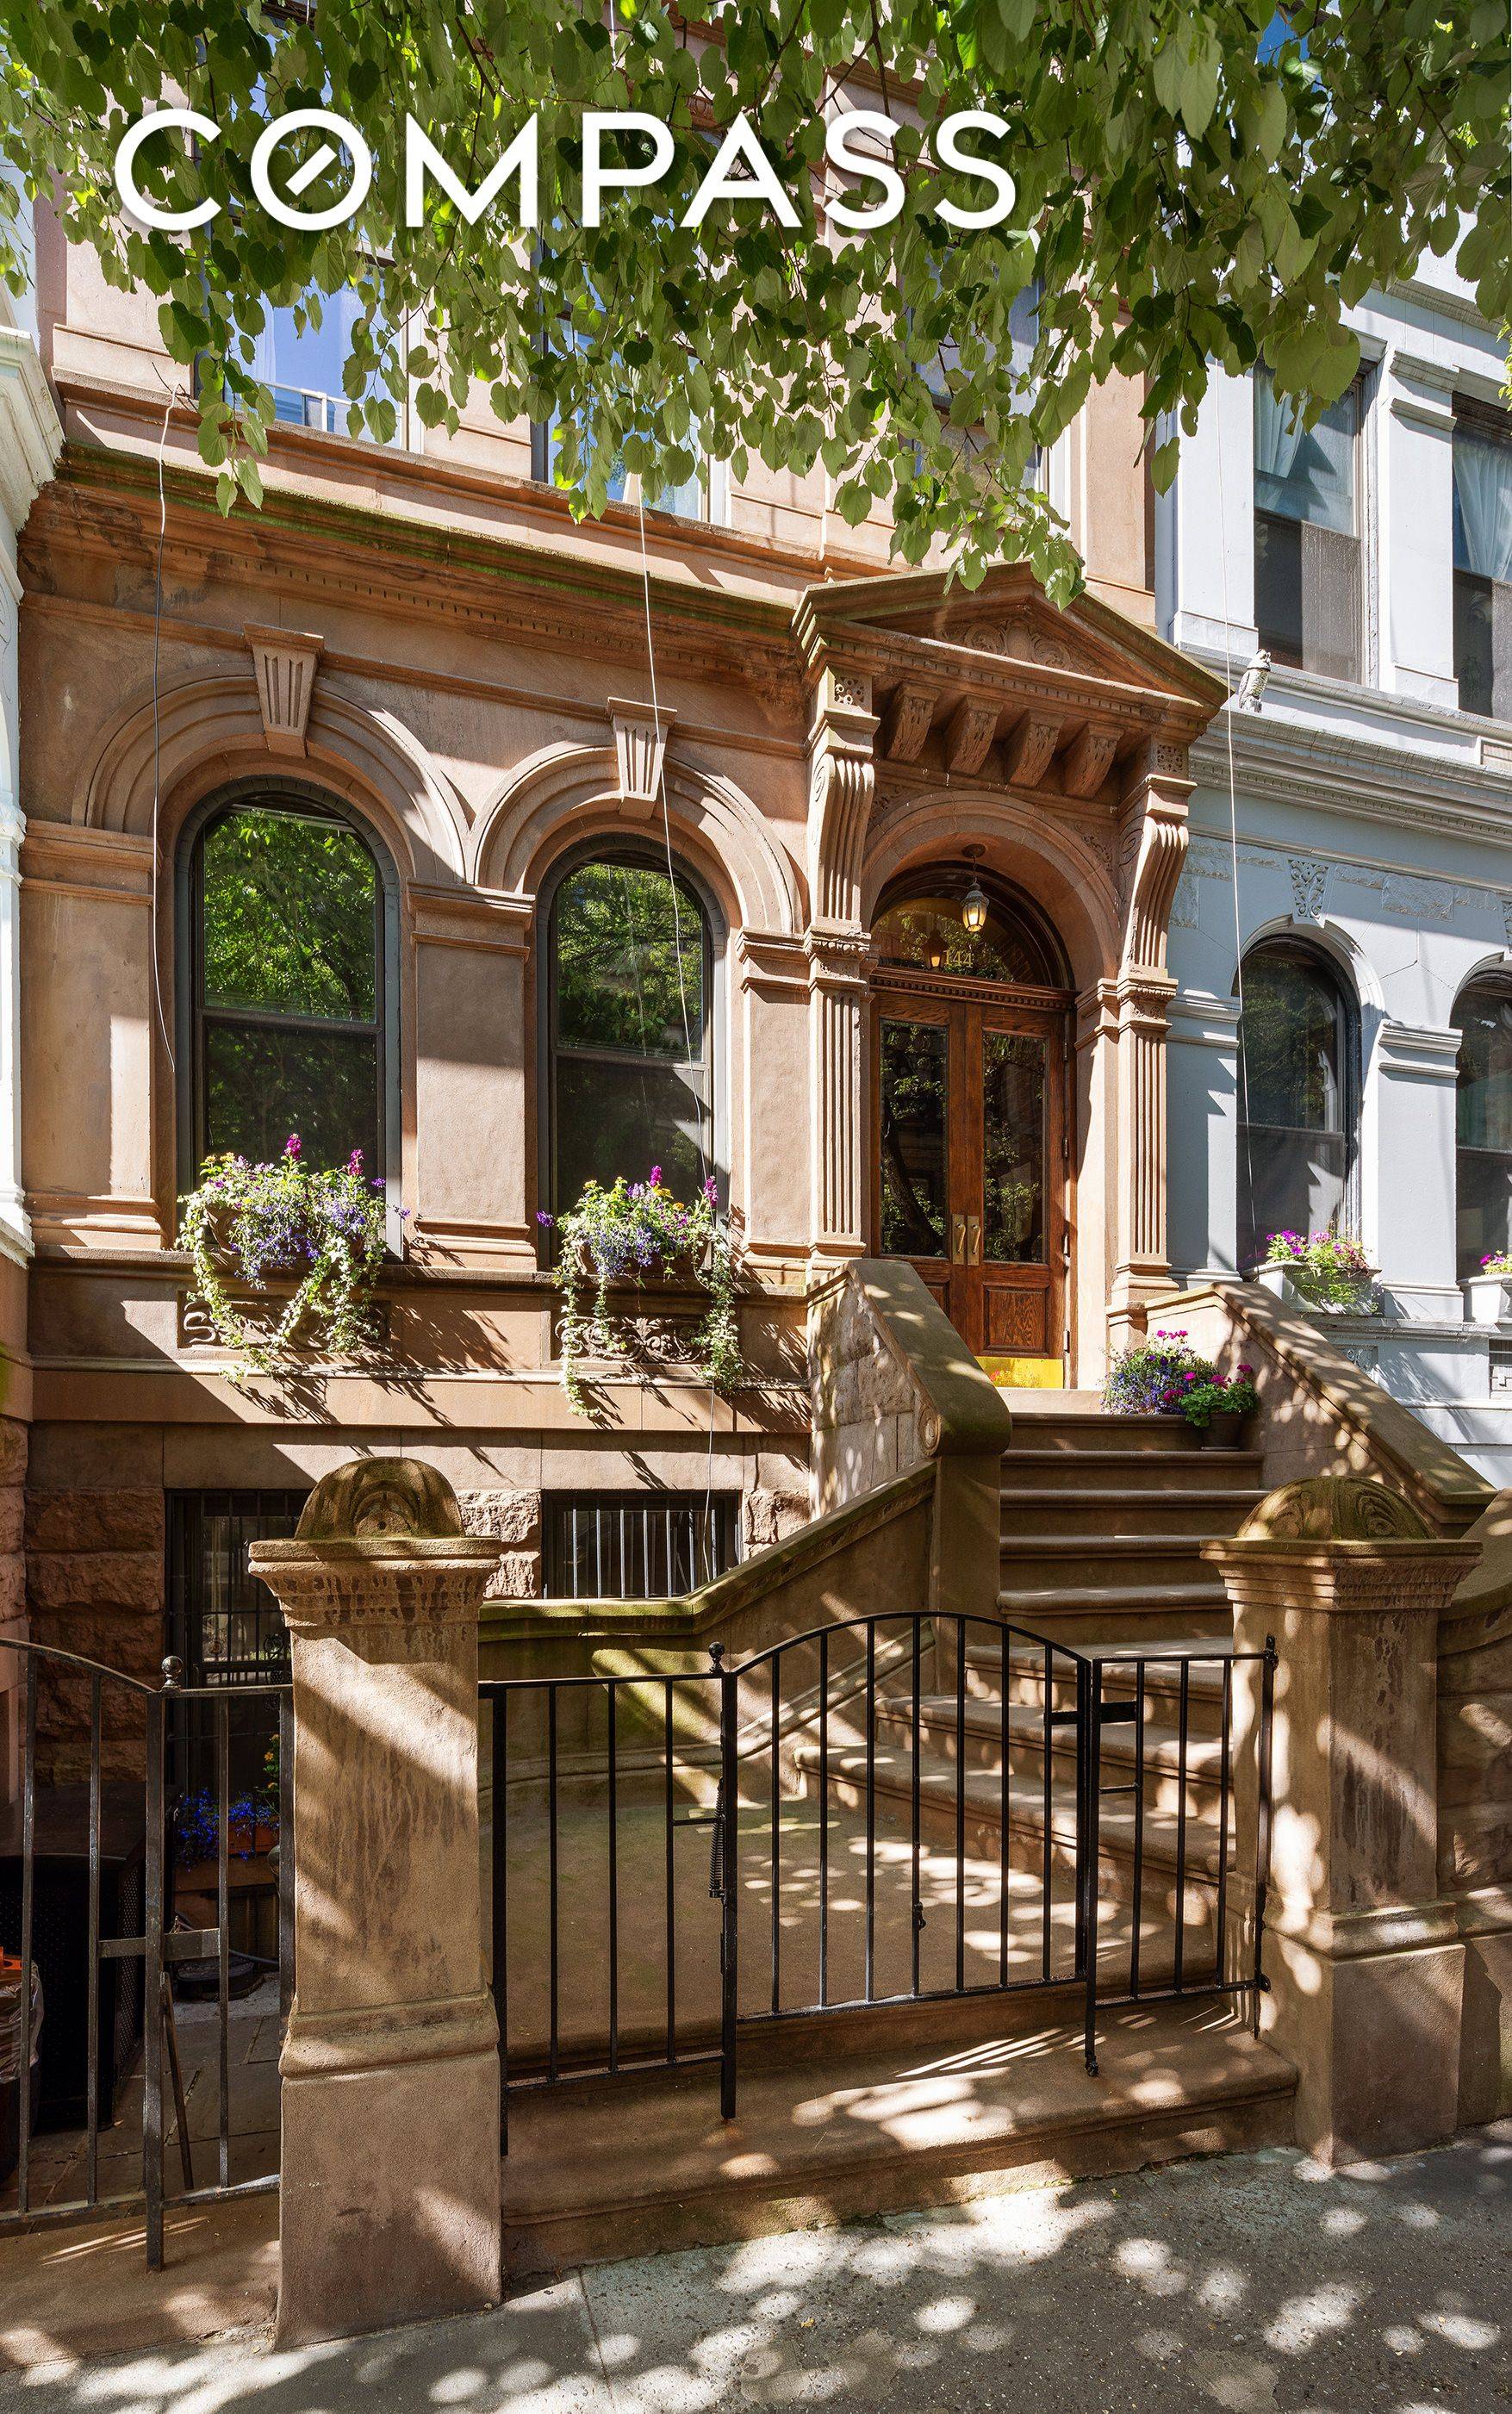 20 BROWNSTONE WITH A RICH HERITAGE PRIME UWS BLOCK West 80th Street, between Columbus and Amsterdam Avenues, is an exquisite landmarked block, bordering the American Museum of Natural History.